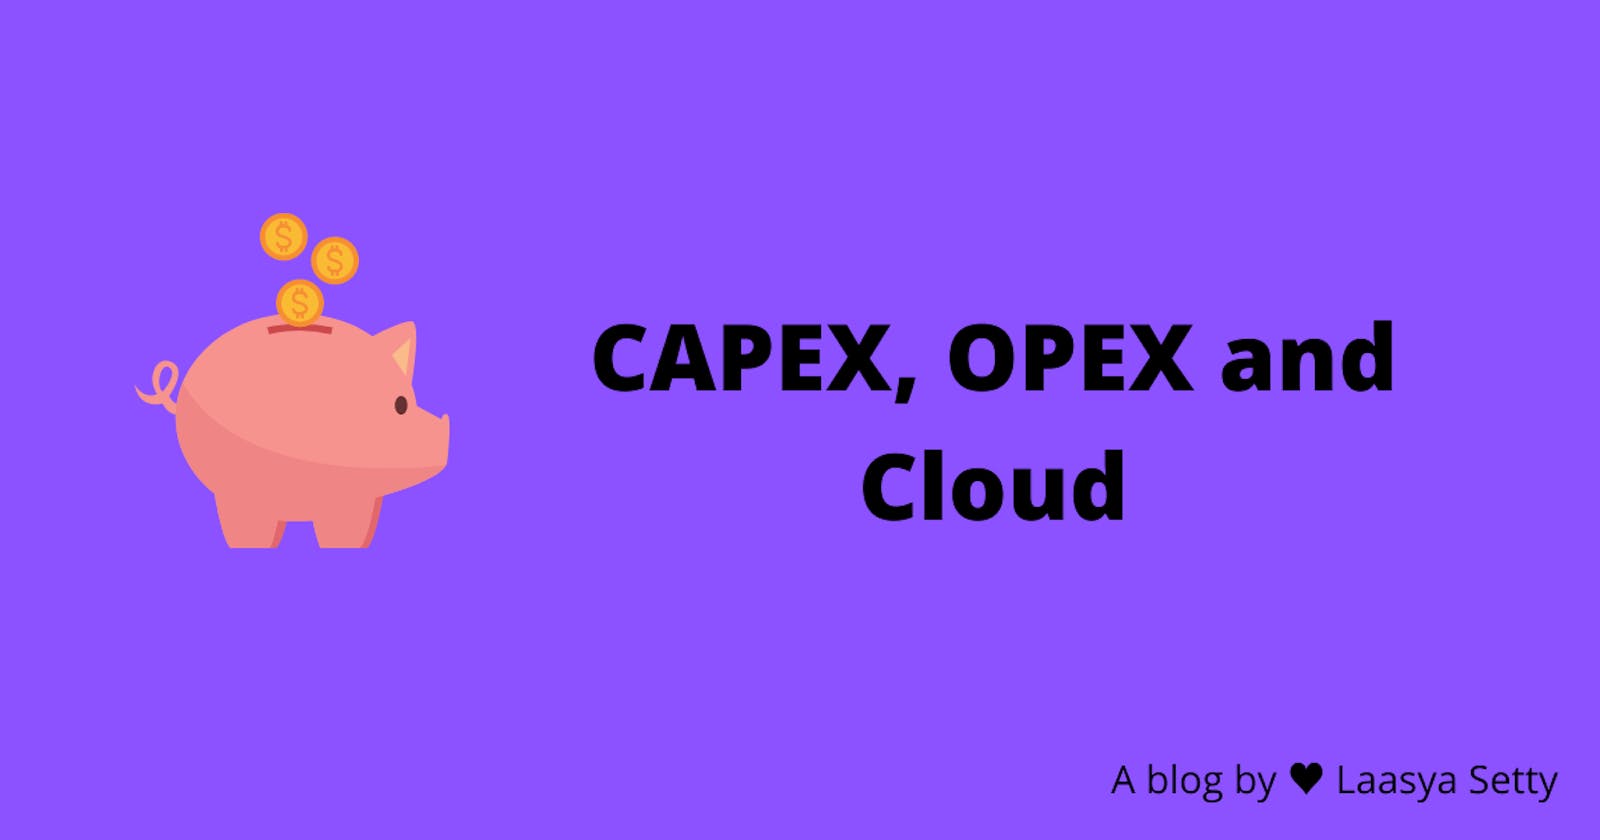 Capital Expenditure(CAPEX), Operating Expense (OPEX) and Cloud.